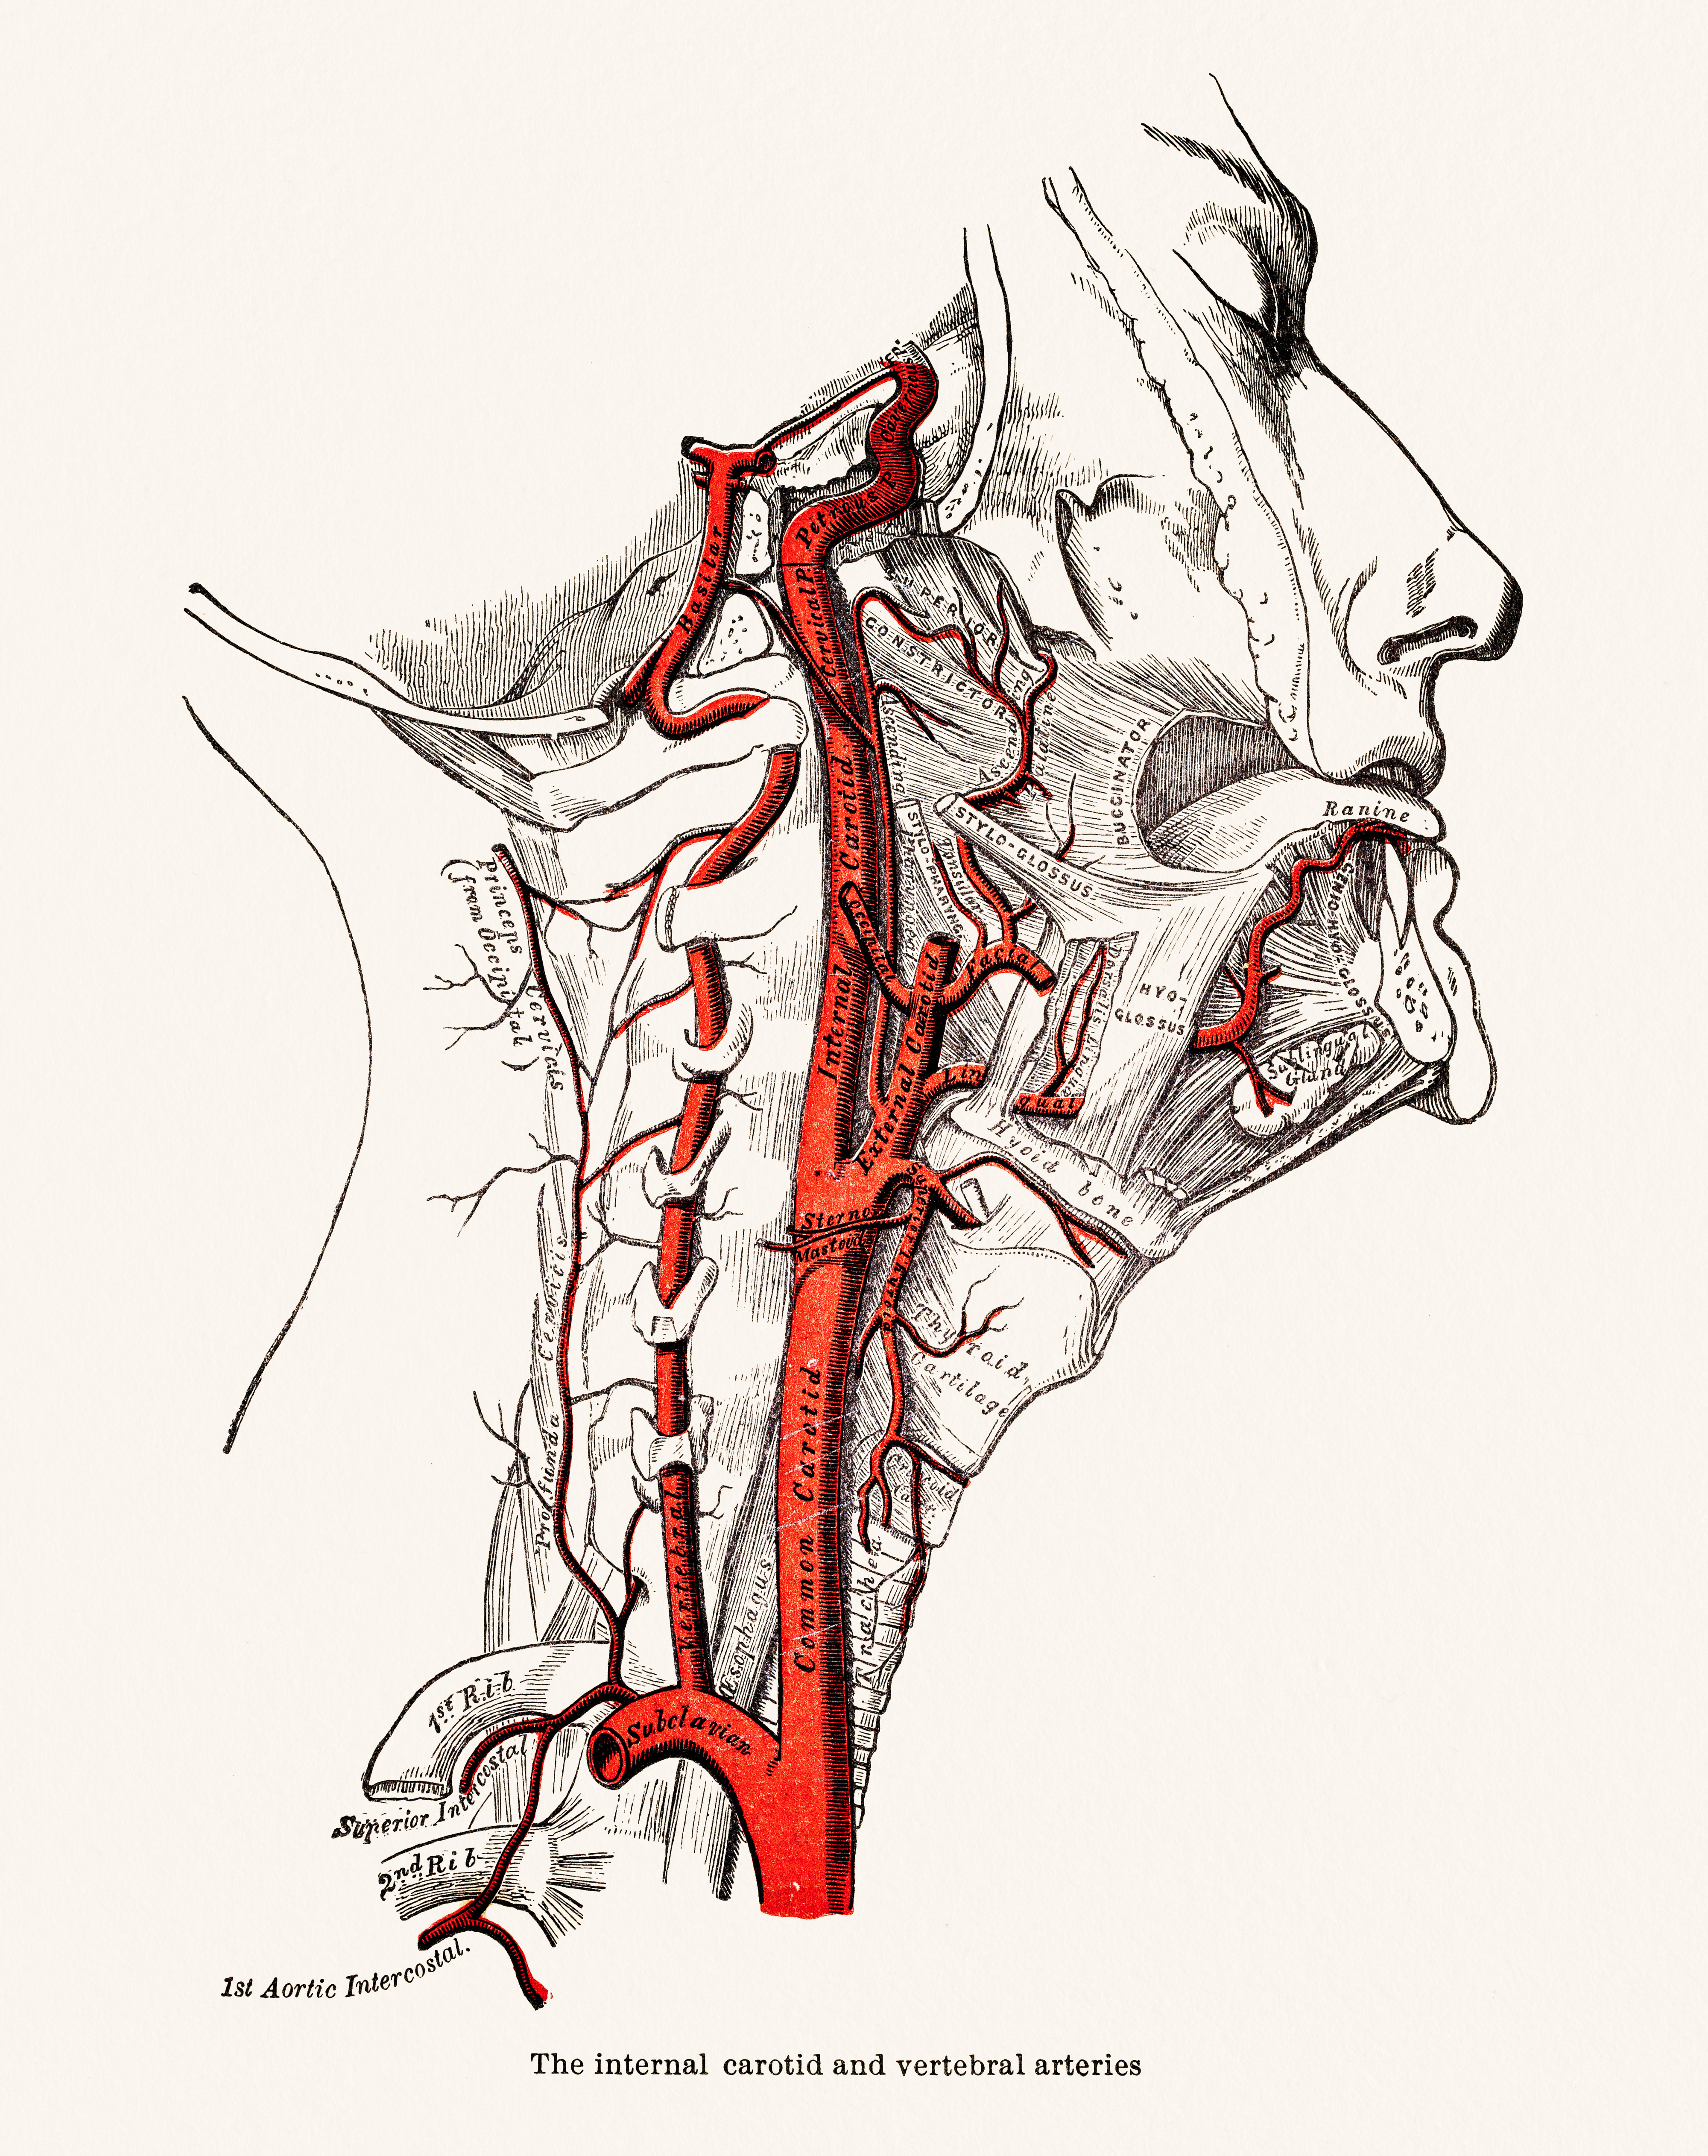 Anatomical drawing showing the carotid and vertebral arteries in the neck